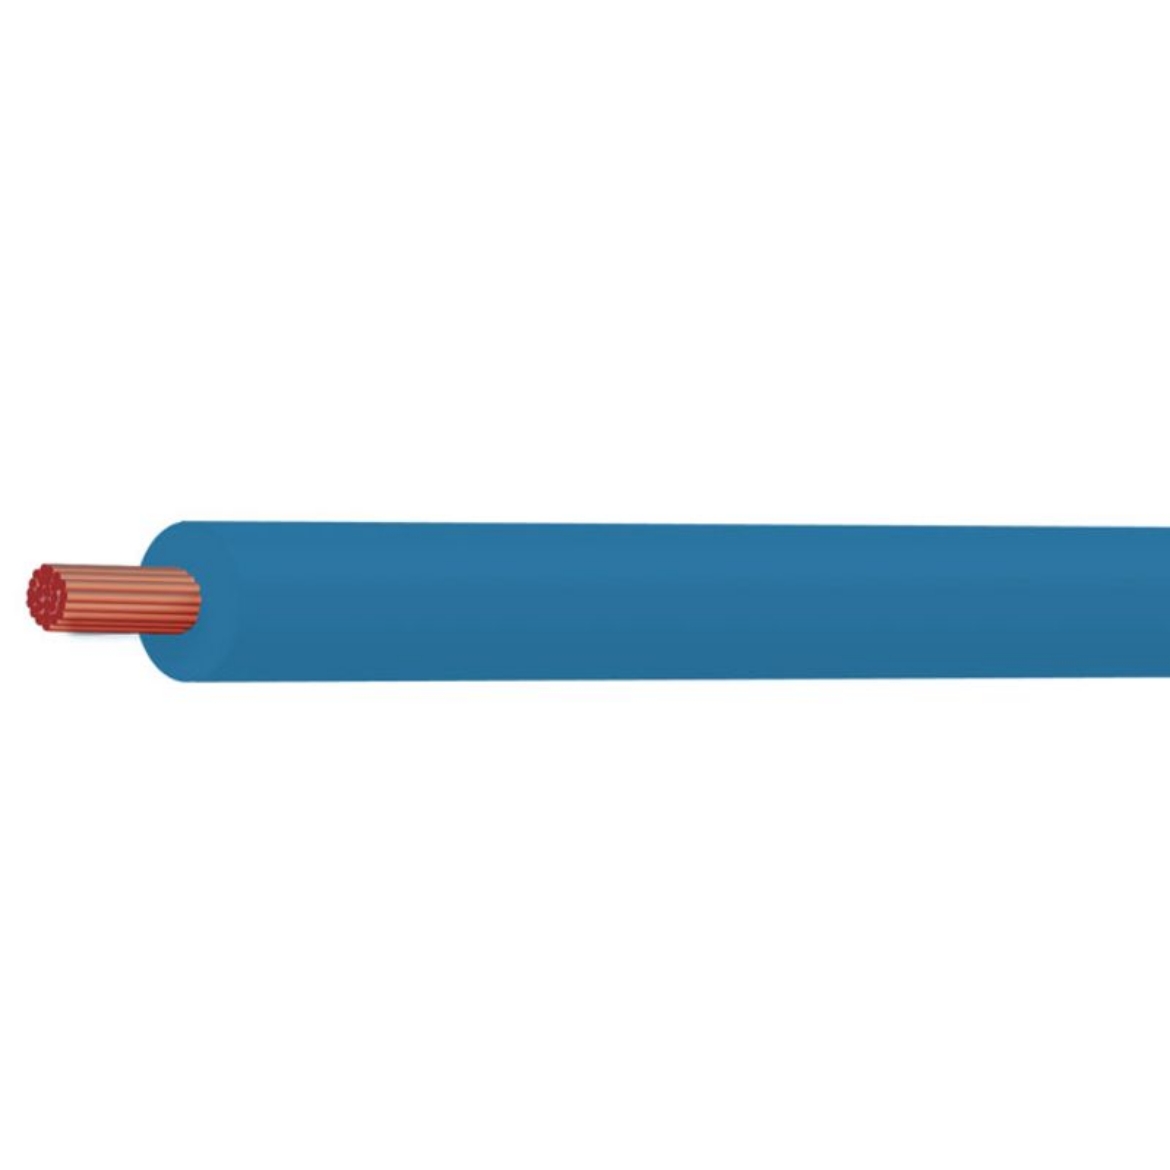 Picture of TYCAB 4MM SINGLE CORE CABLE 15A BLUE (1.85 SQ) - 100M ROLL